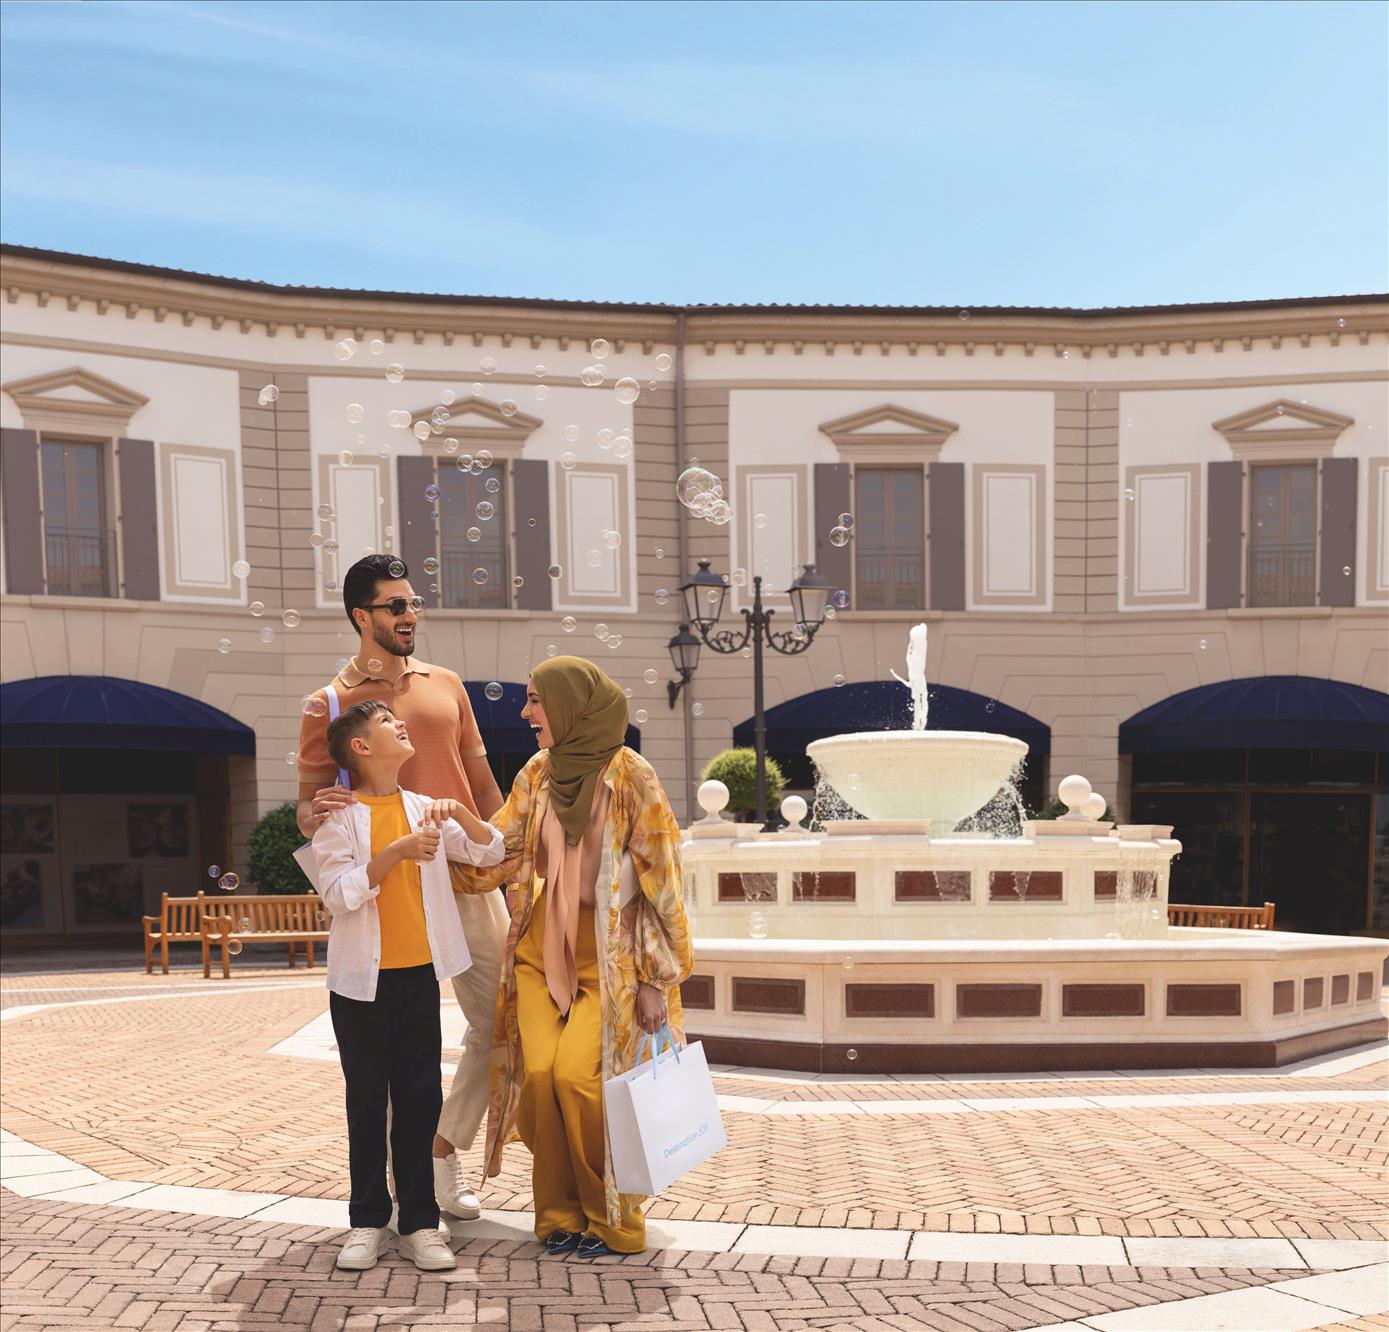 Middle Eastern Tourists Drive European Shopping Renaissance with McArthurGlen Leading the Way on Their Travel Itineraries